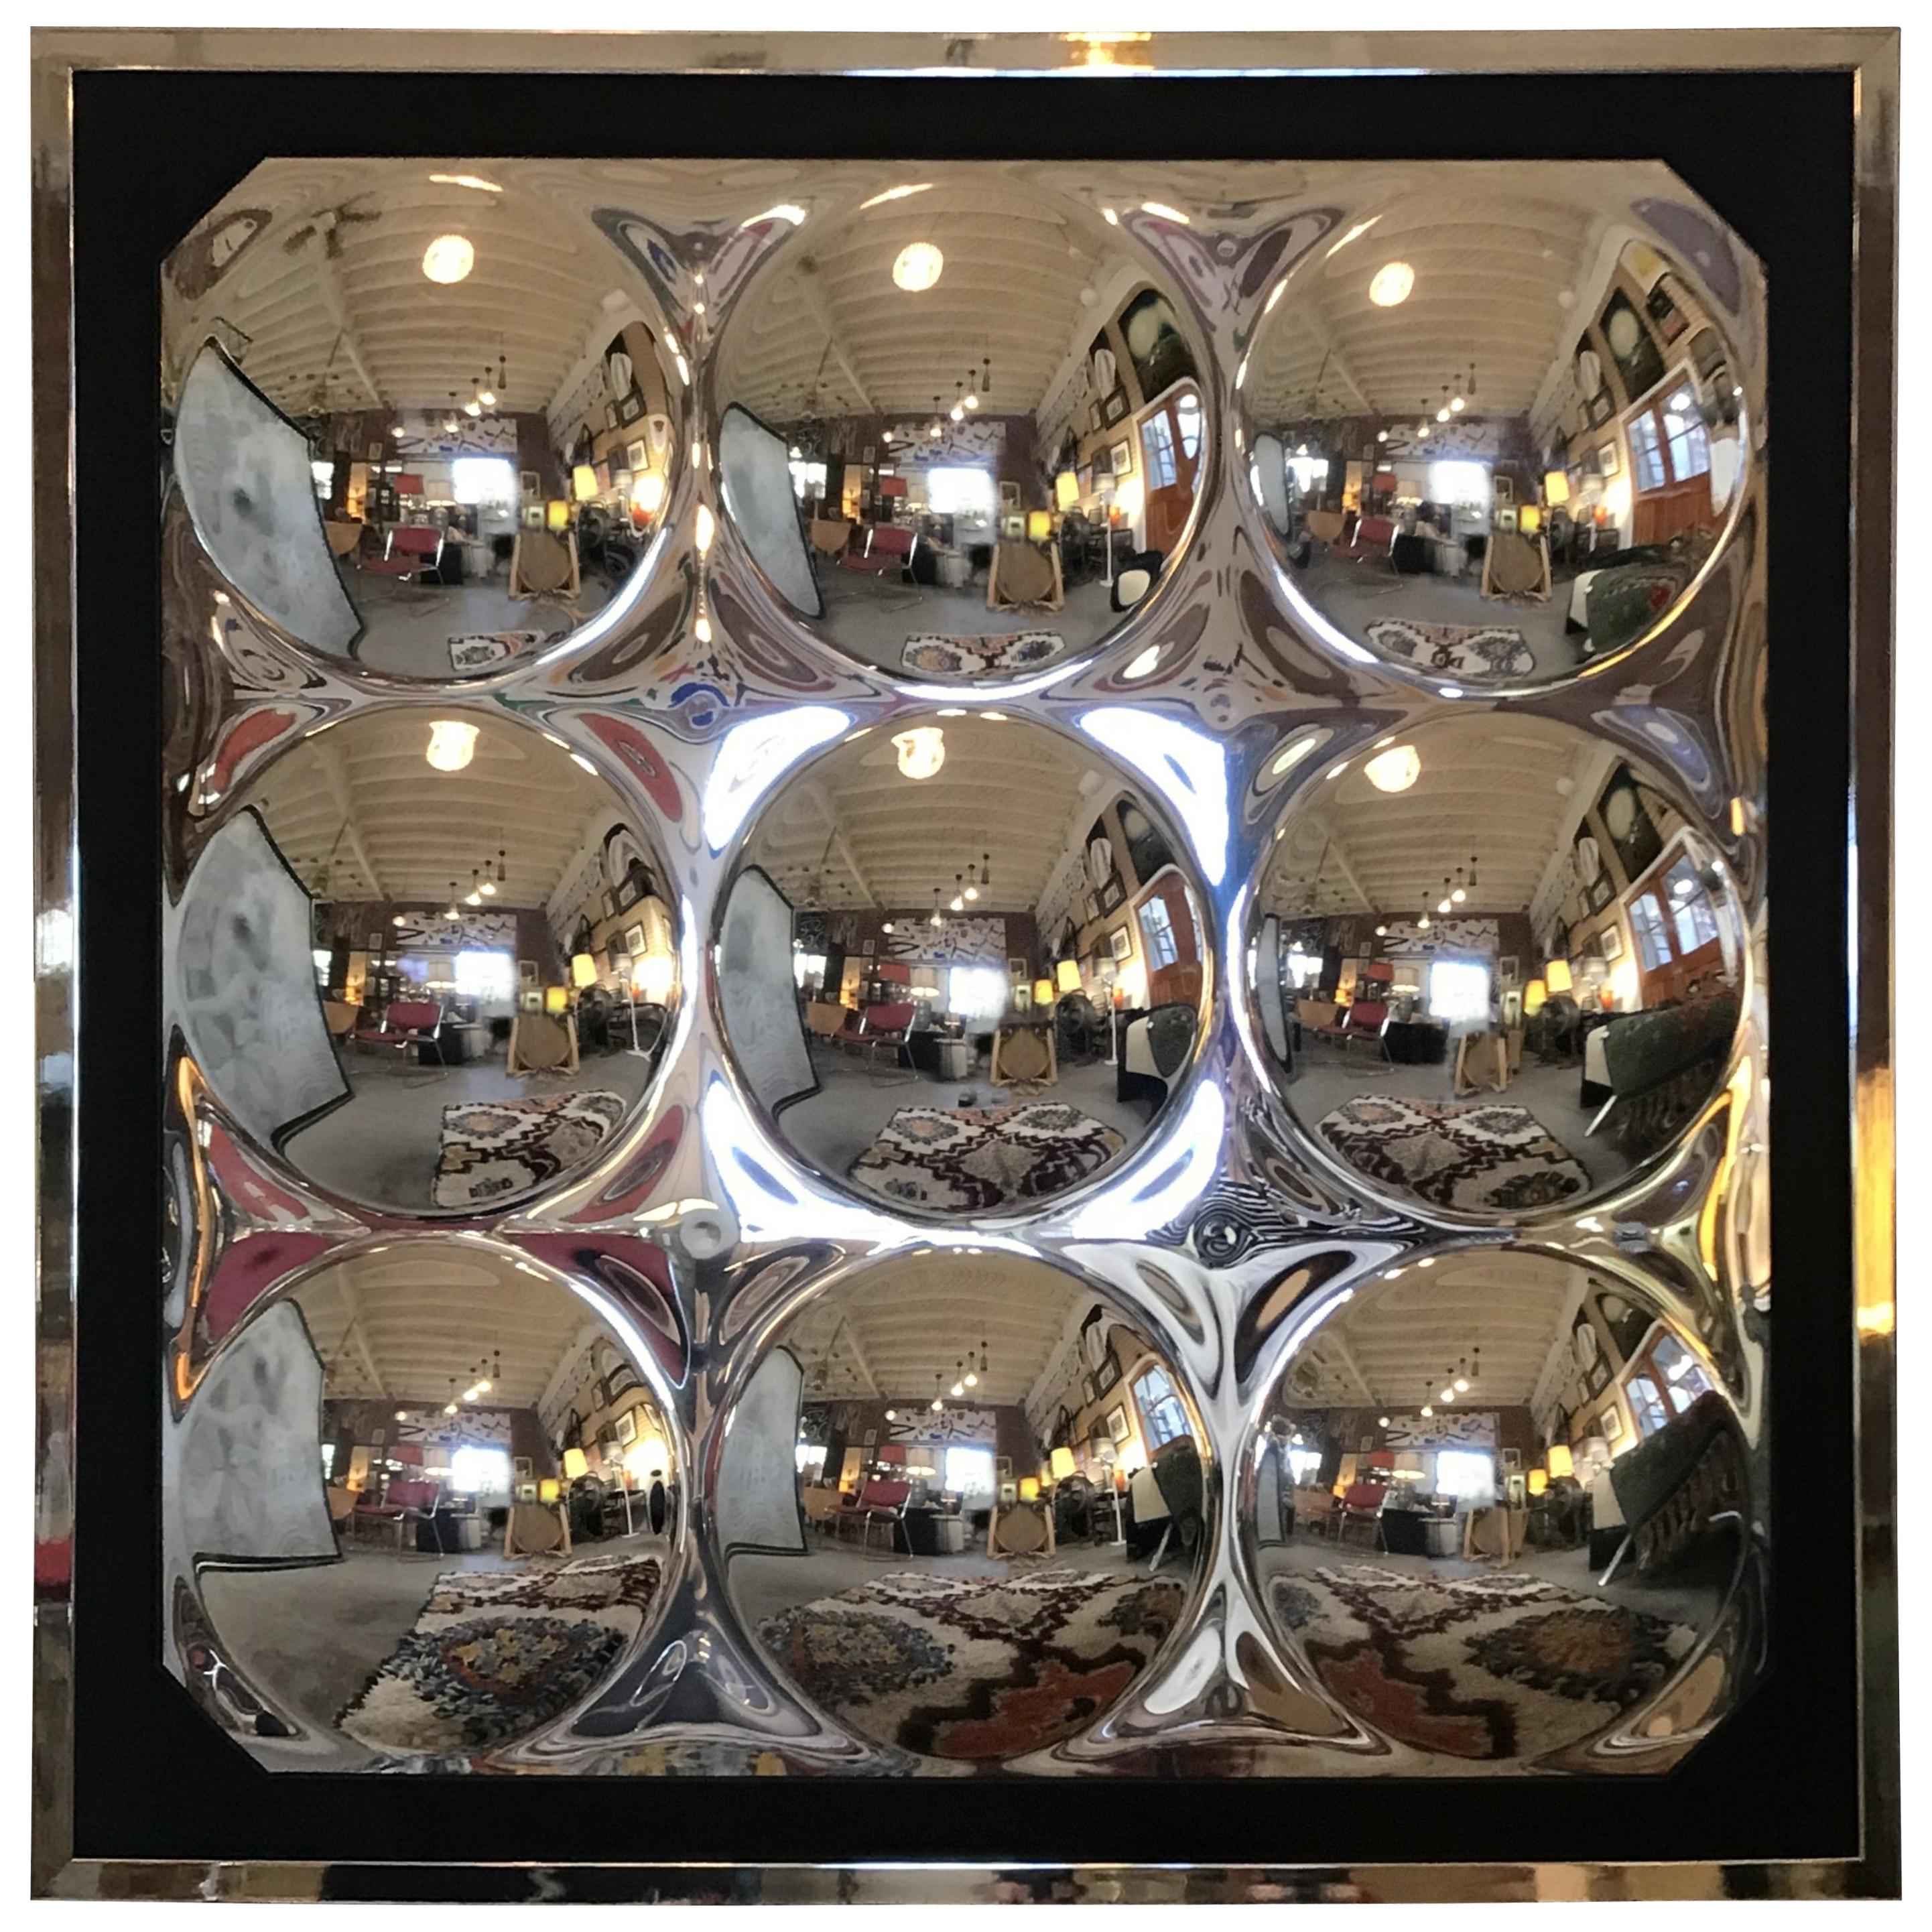 A pair engaging mirrored wall hanging made of nine convex circles arranged in a grid. They sit in chromed frames.
They can be sold separately.